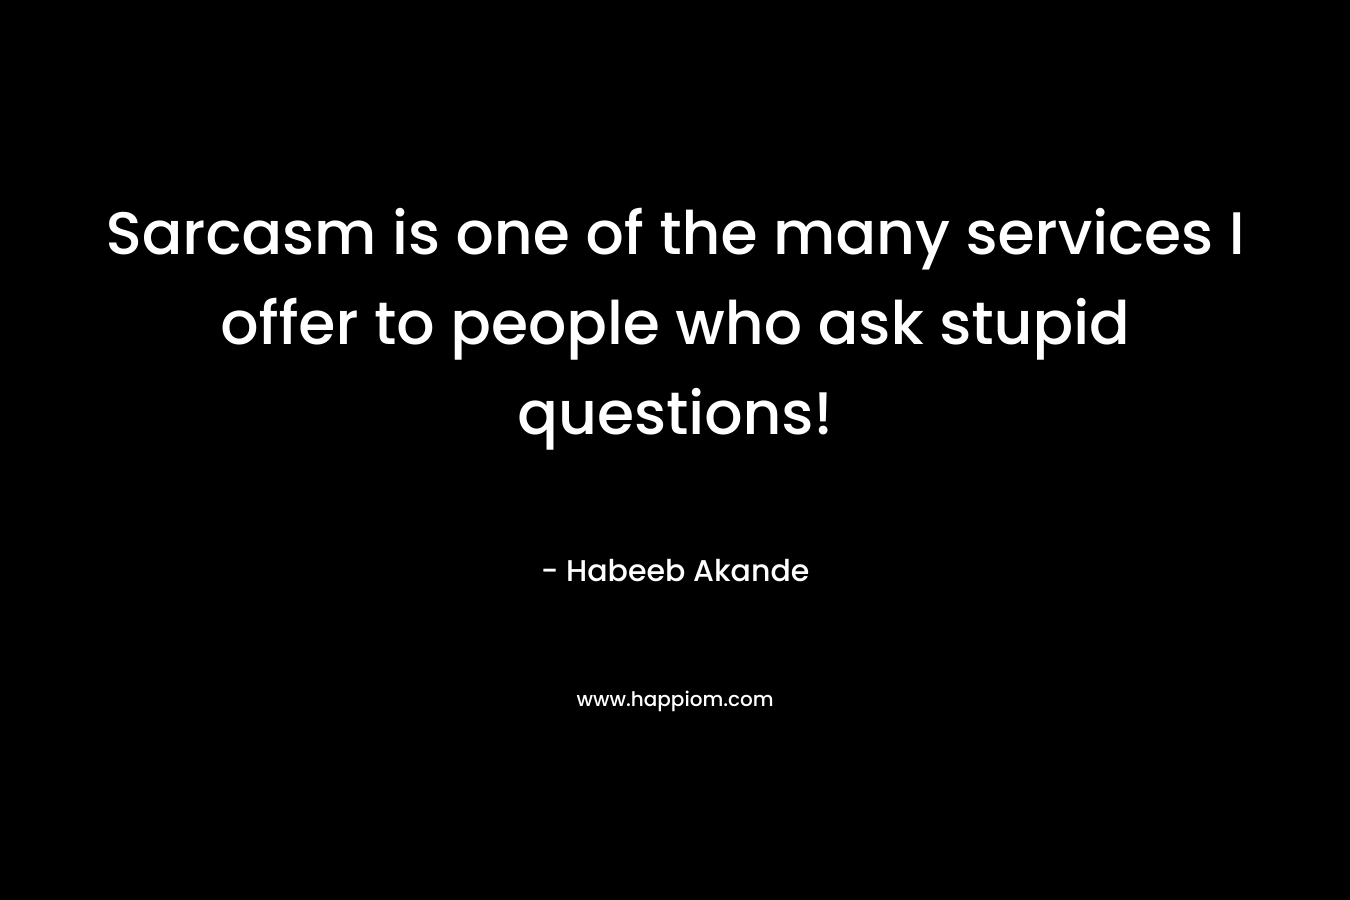 Sarcasm is one of the many services I offer to people who ask stupid questions! – Habeeb Akande